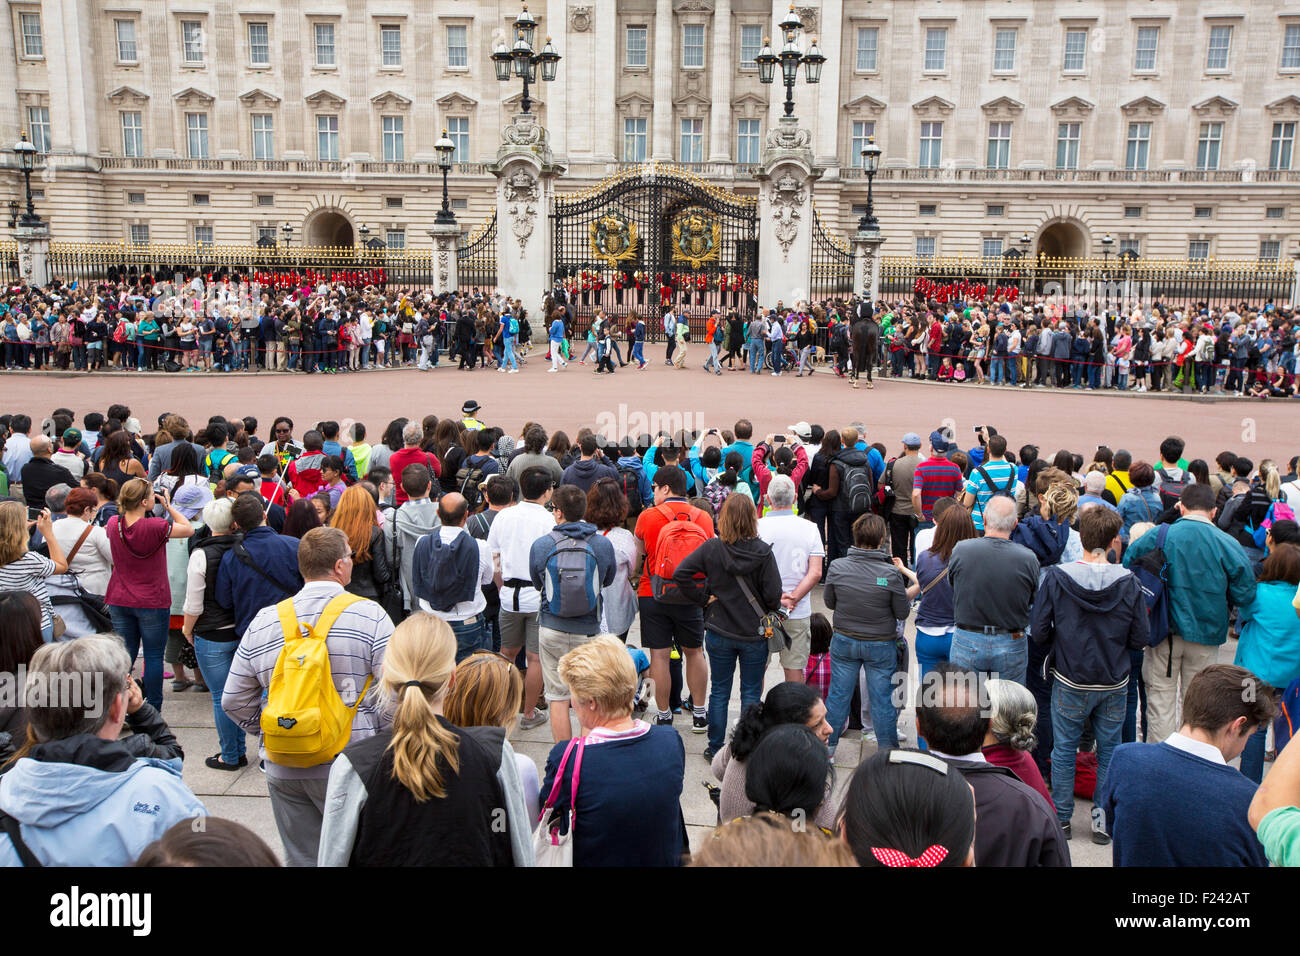 Tourists queue to watch the changeing of the guard at Buckingham Palace, London, UK. Stock Photo